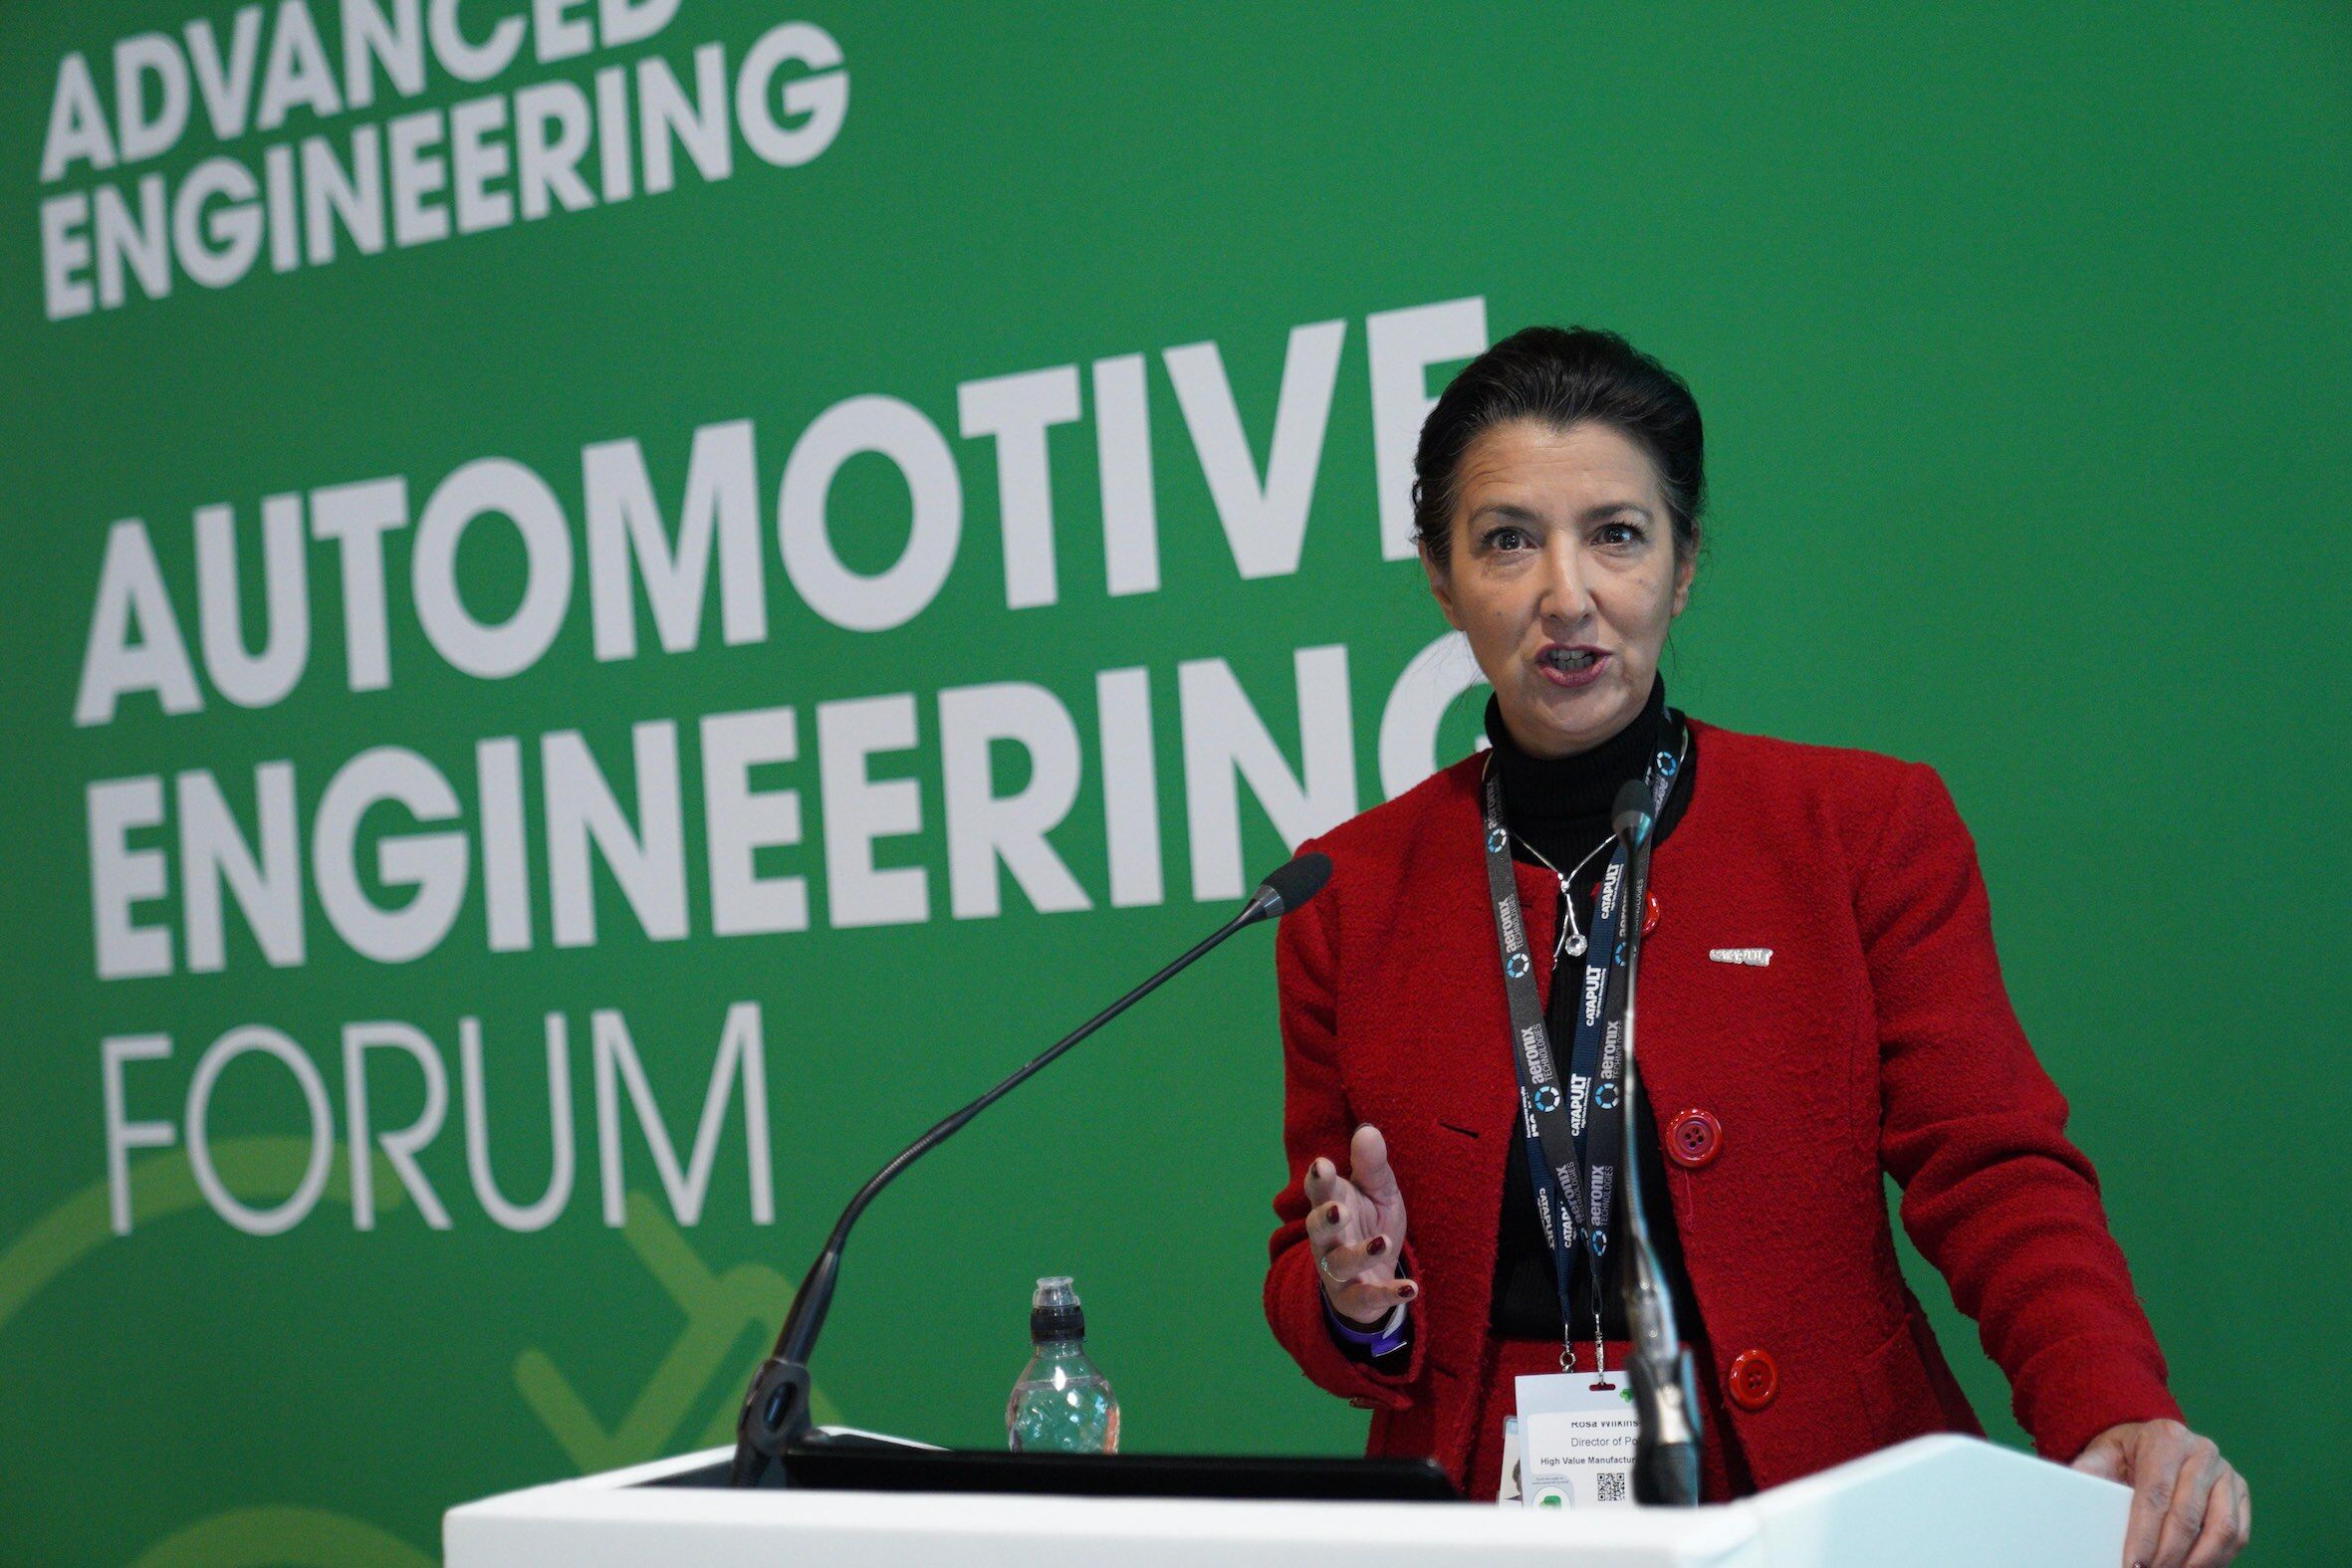 Leading voices in engineering take to the stage